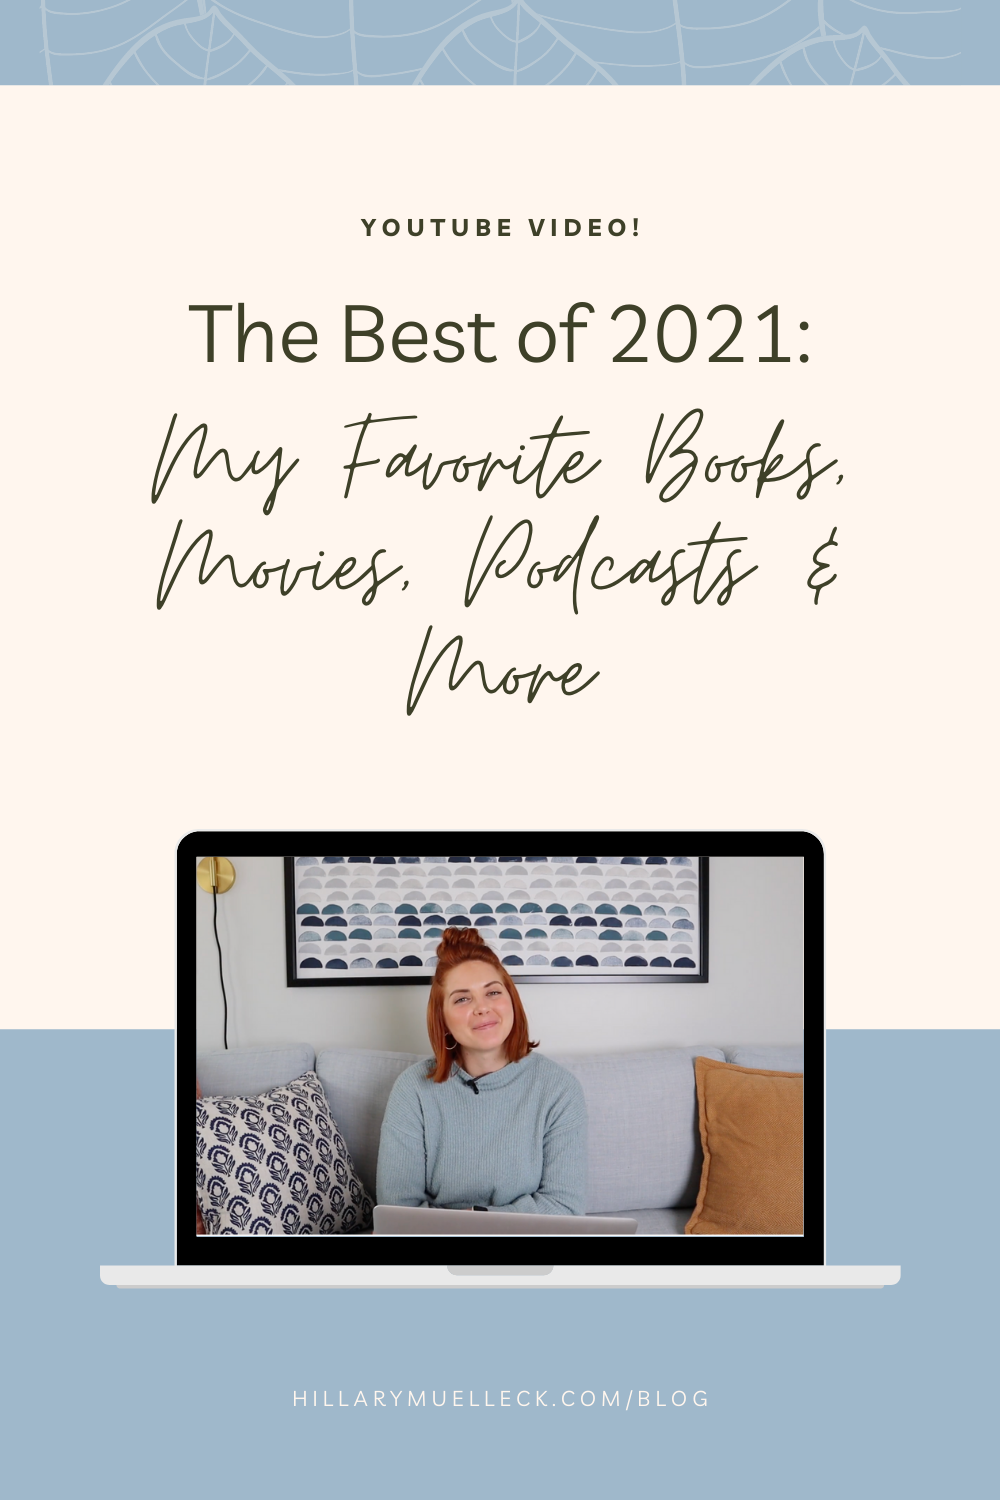 The Best of 2021: Hillary Muelleck shares her favorite books, podcasts, recipes, and more from 2021 as an end of the year recap